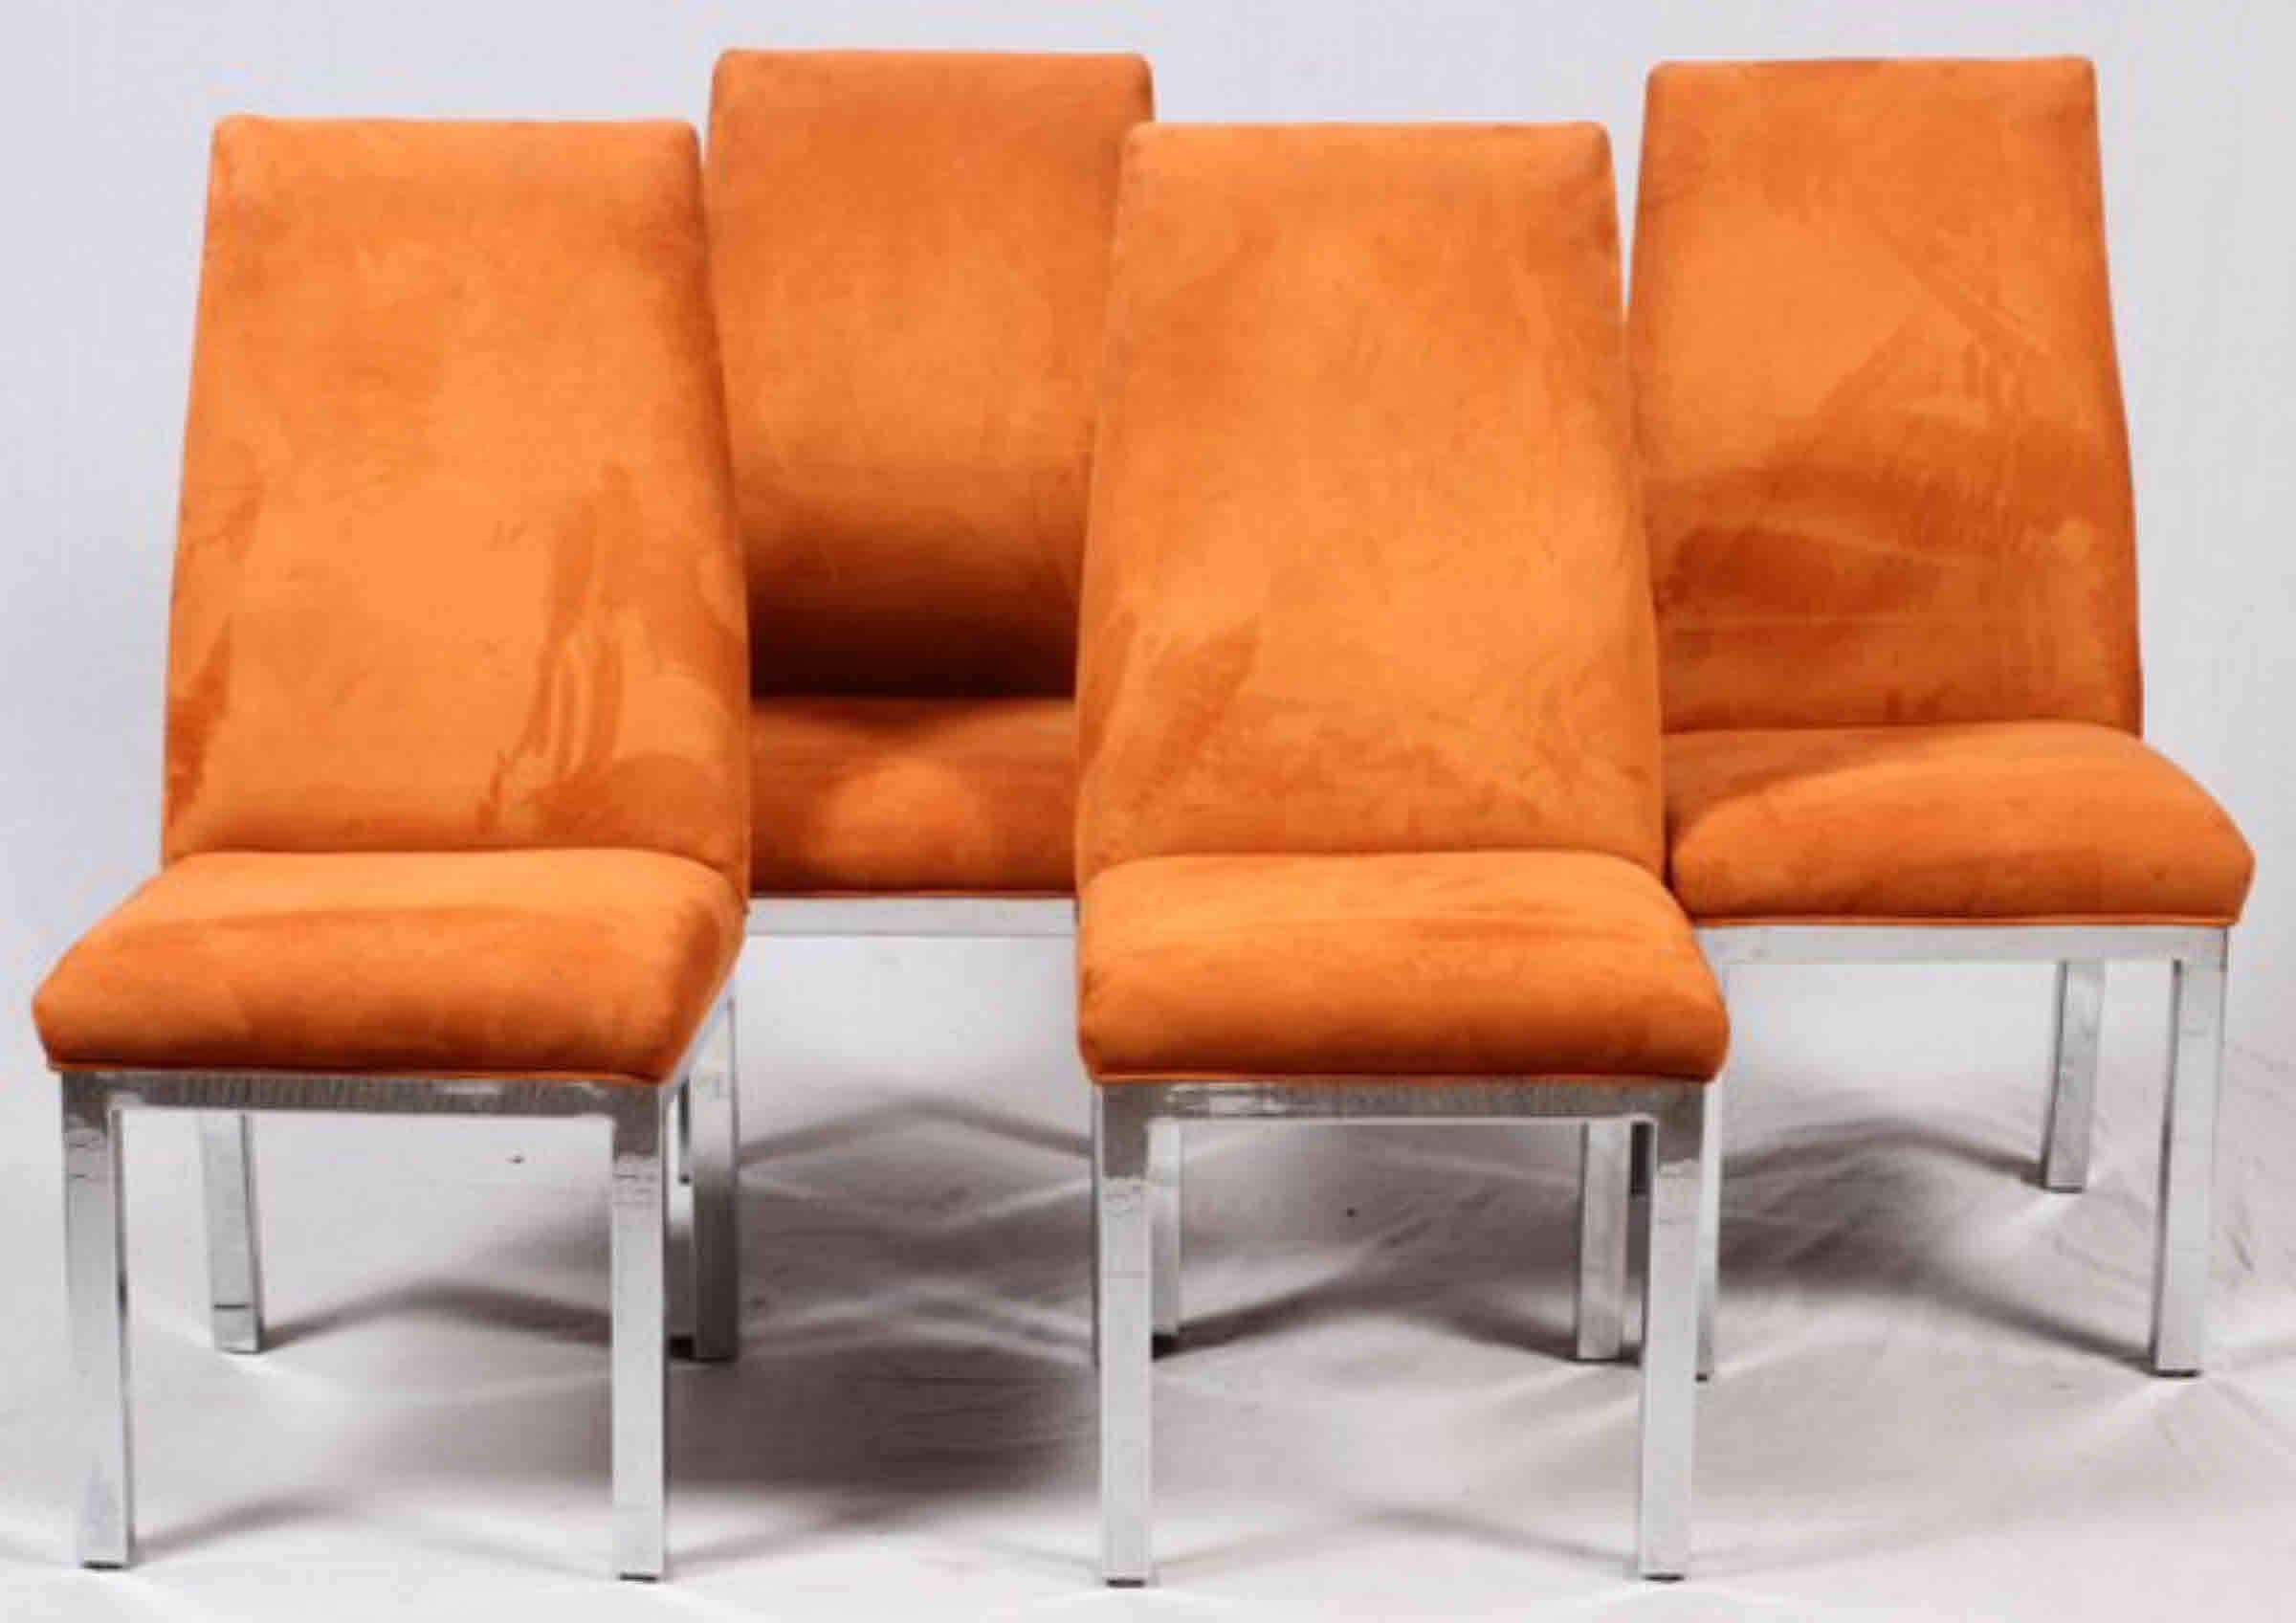 Set of eight burnt orange on chrome leg chairs by Paul Evans for Directional. Chrome and foam/cushions are in good condition but would benefit from being reupholstered. The dimensions are 19